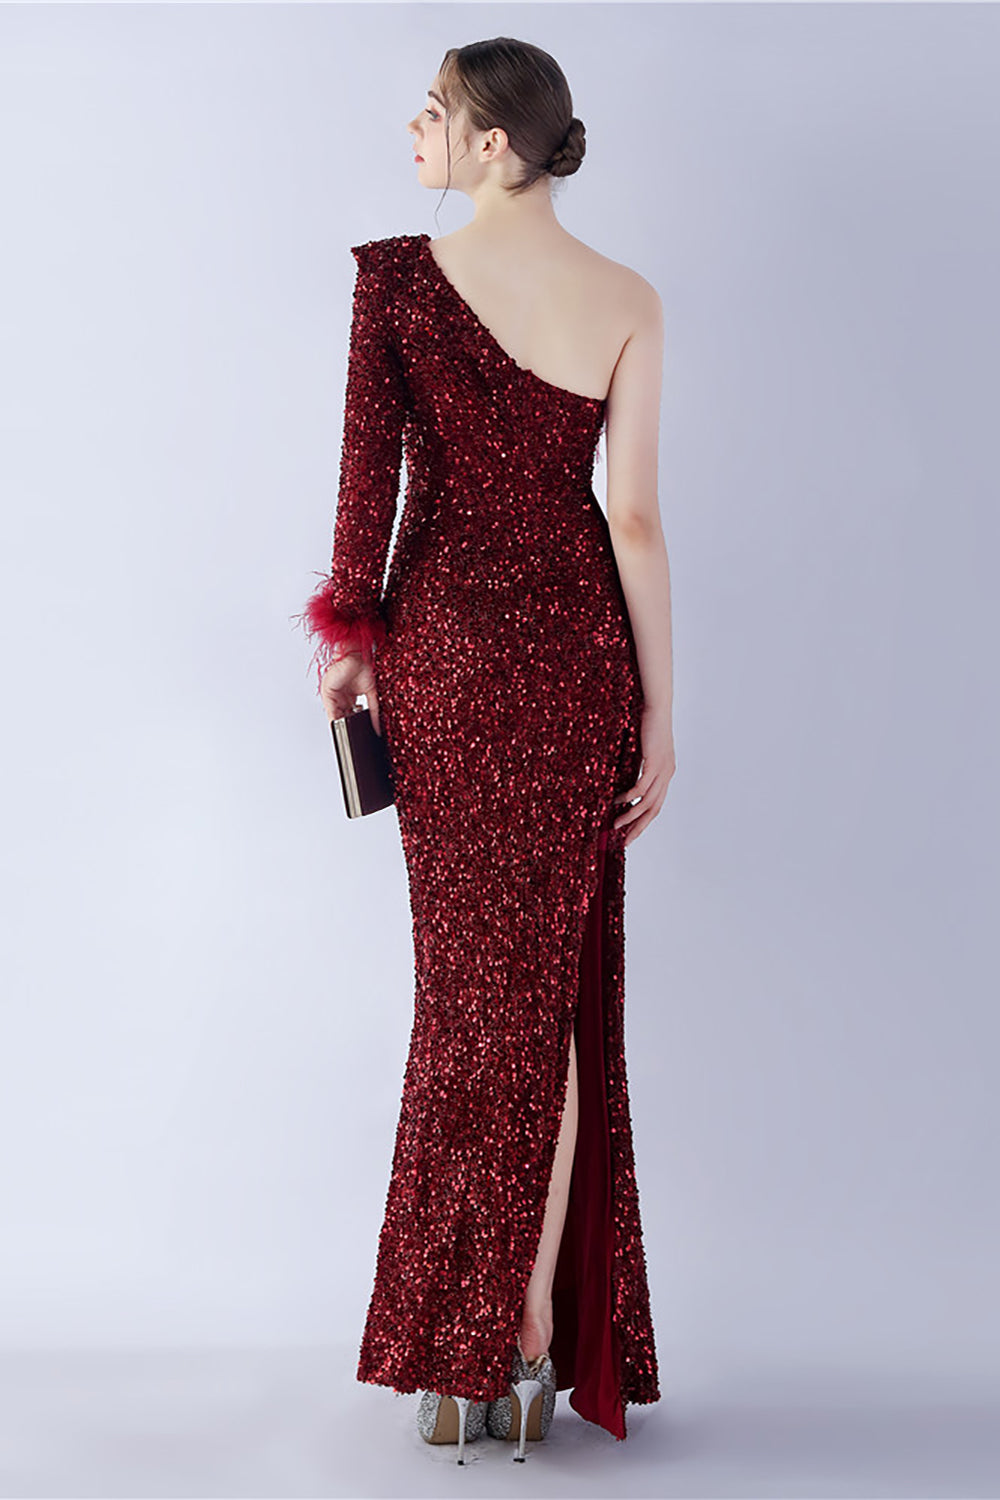 Mermaid One Shoulder Sequin Evening Dress With Feathers